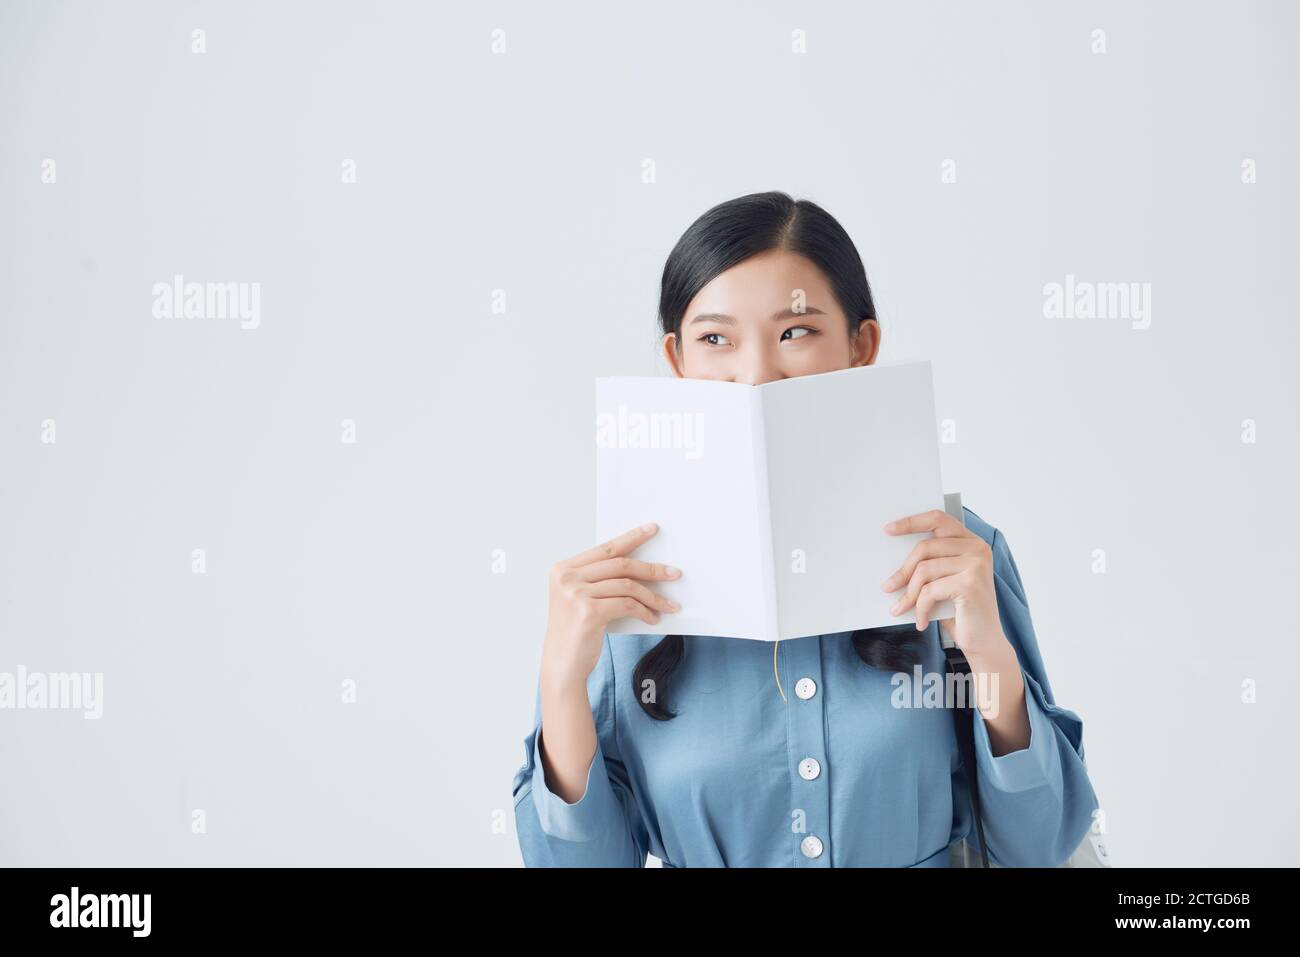 Joyful dark-haired girl covers her face with her white notebook Stock Photo